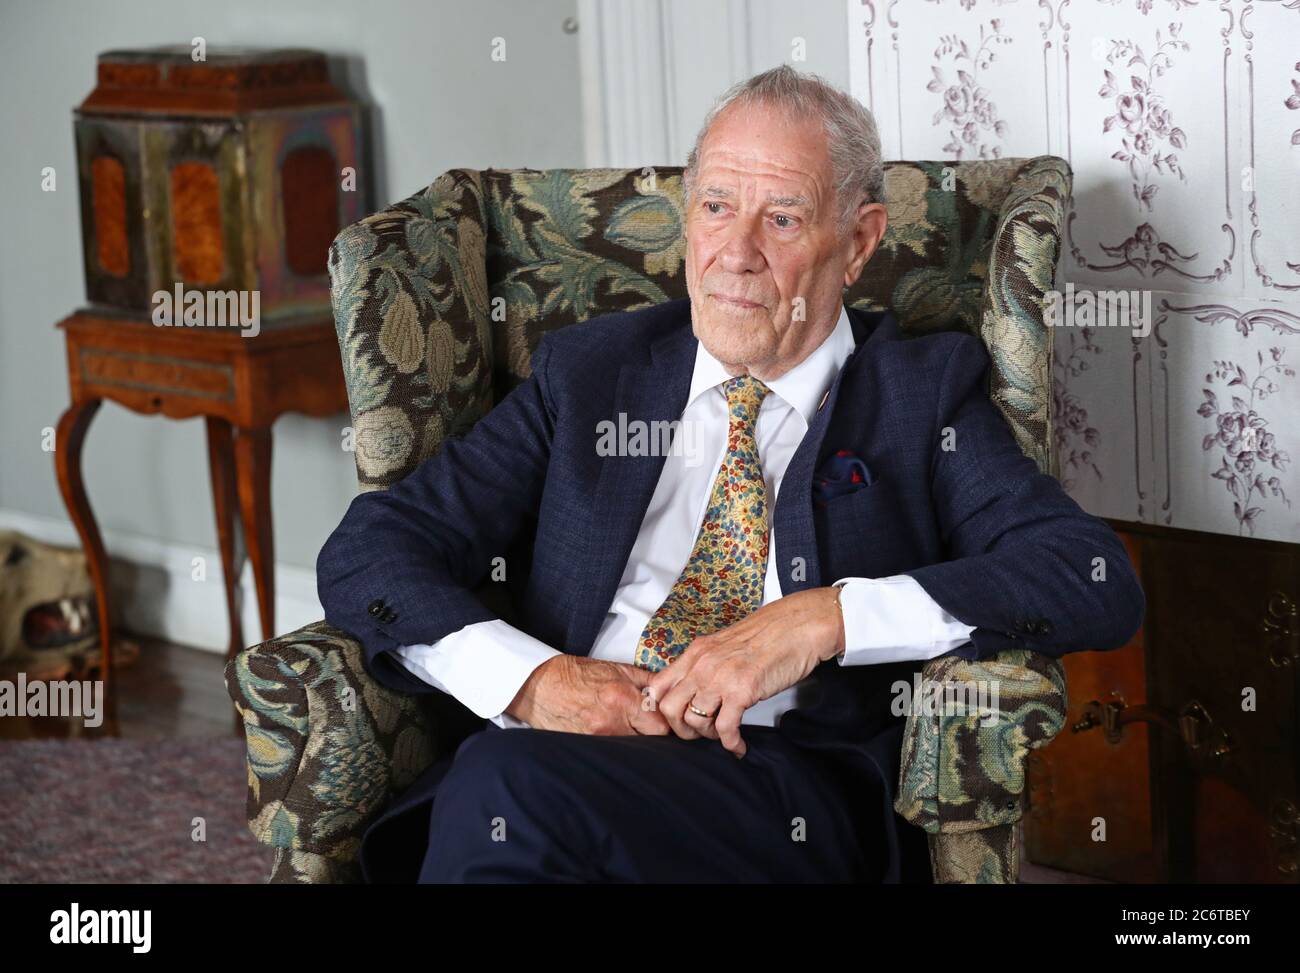 Övralid, Sweden 20190706 The author Per Wästberg during Övralidsdagen. Per  Wästberg is a Swedish author and literary critic. Photo Jeppe Gustafsson  Stock Photo - Alamy